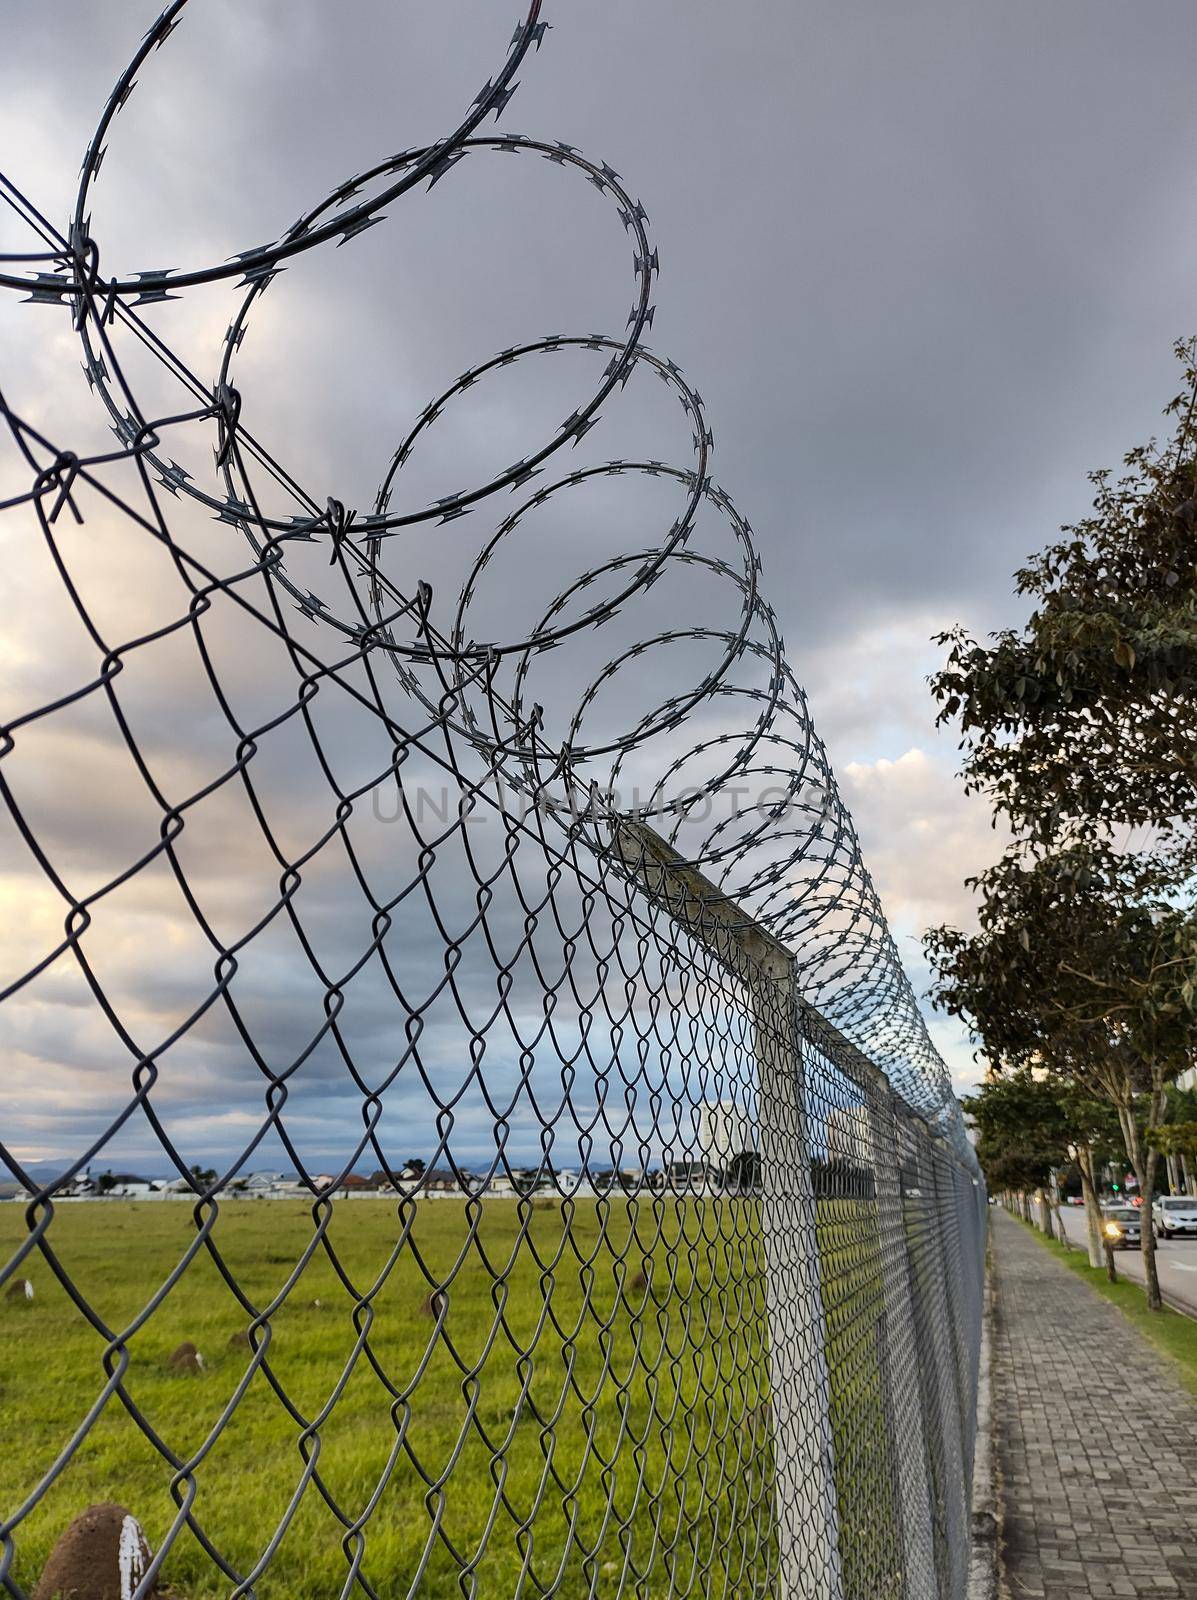 Barbed wire fence in green field, with cloudy sky in the background.